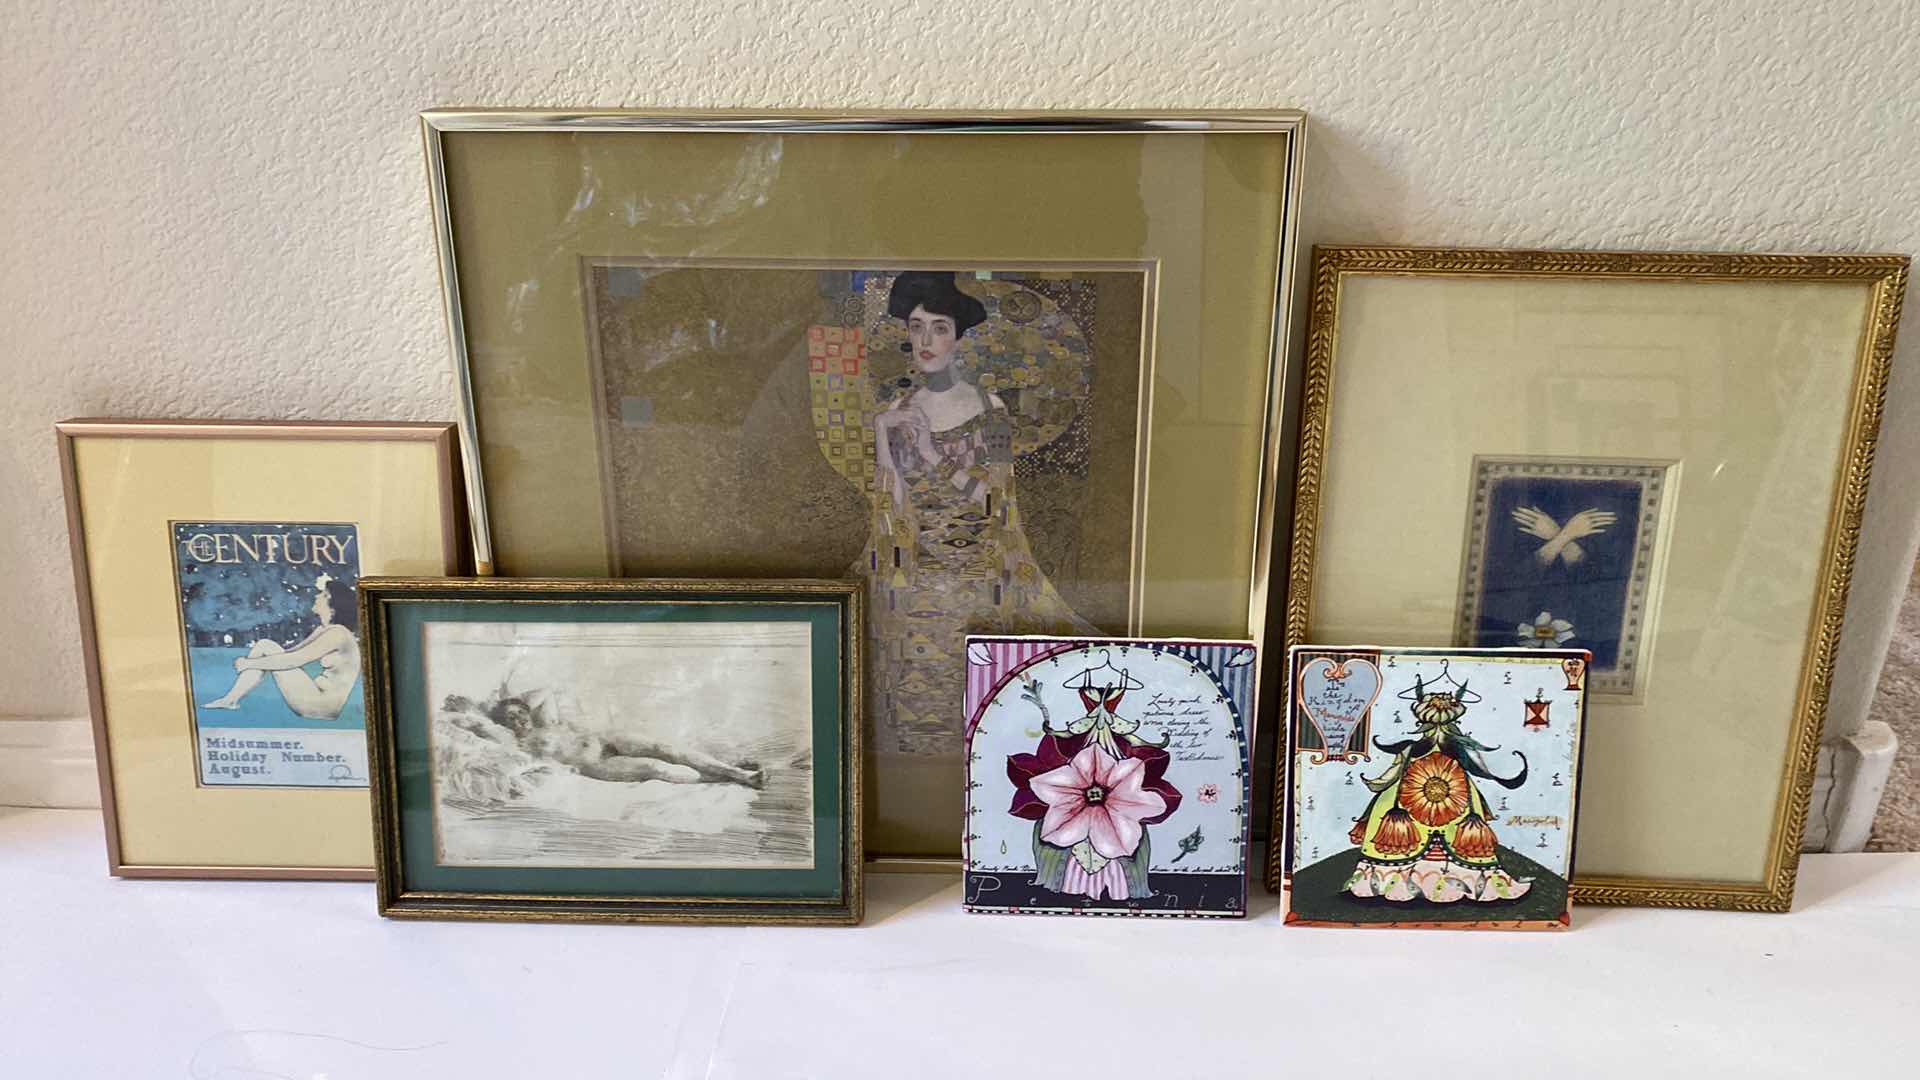 Photo 1 of FRAMED ARTWORK ASSORTMENT LARGEST 16 1/4” x 16 1/4” AND 2 TILES